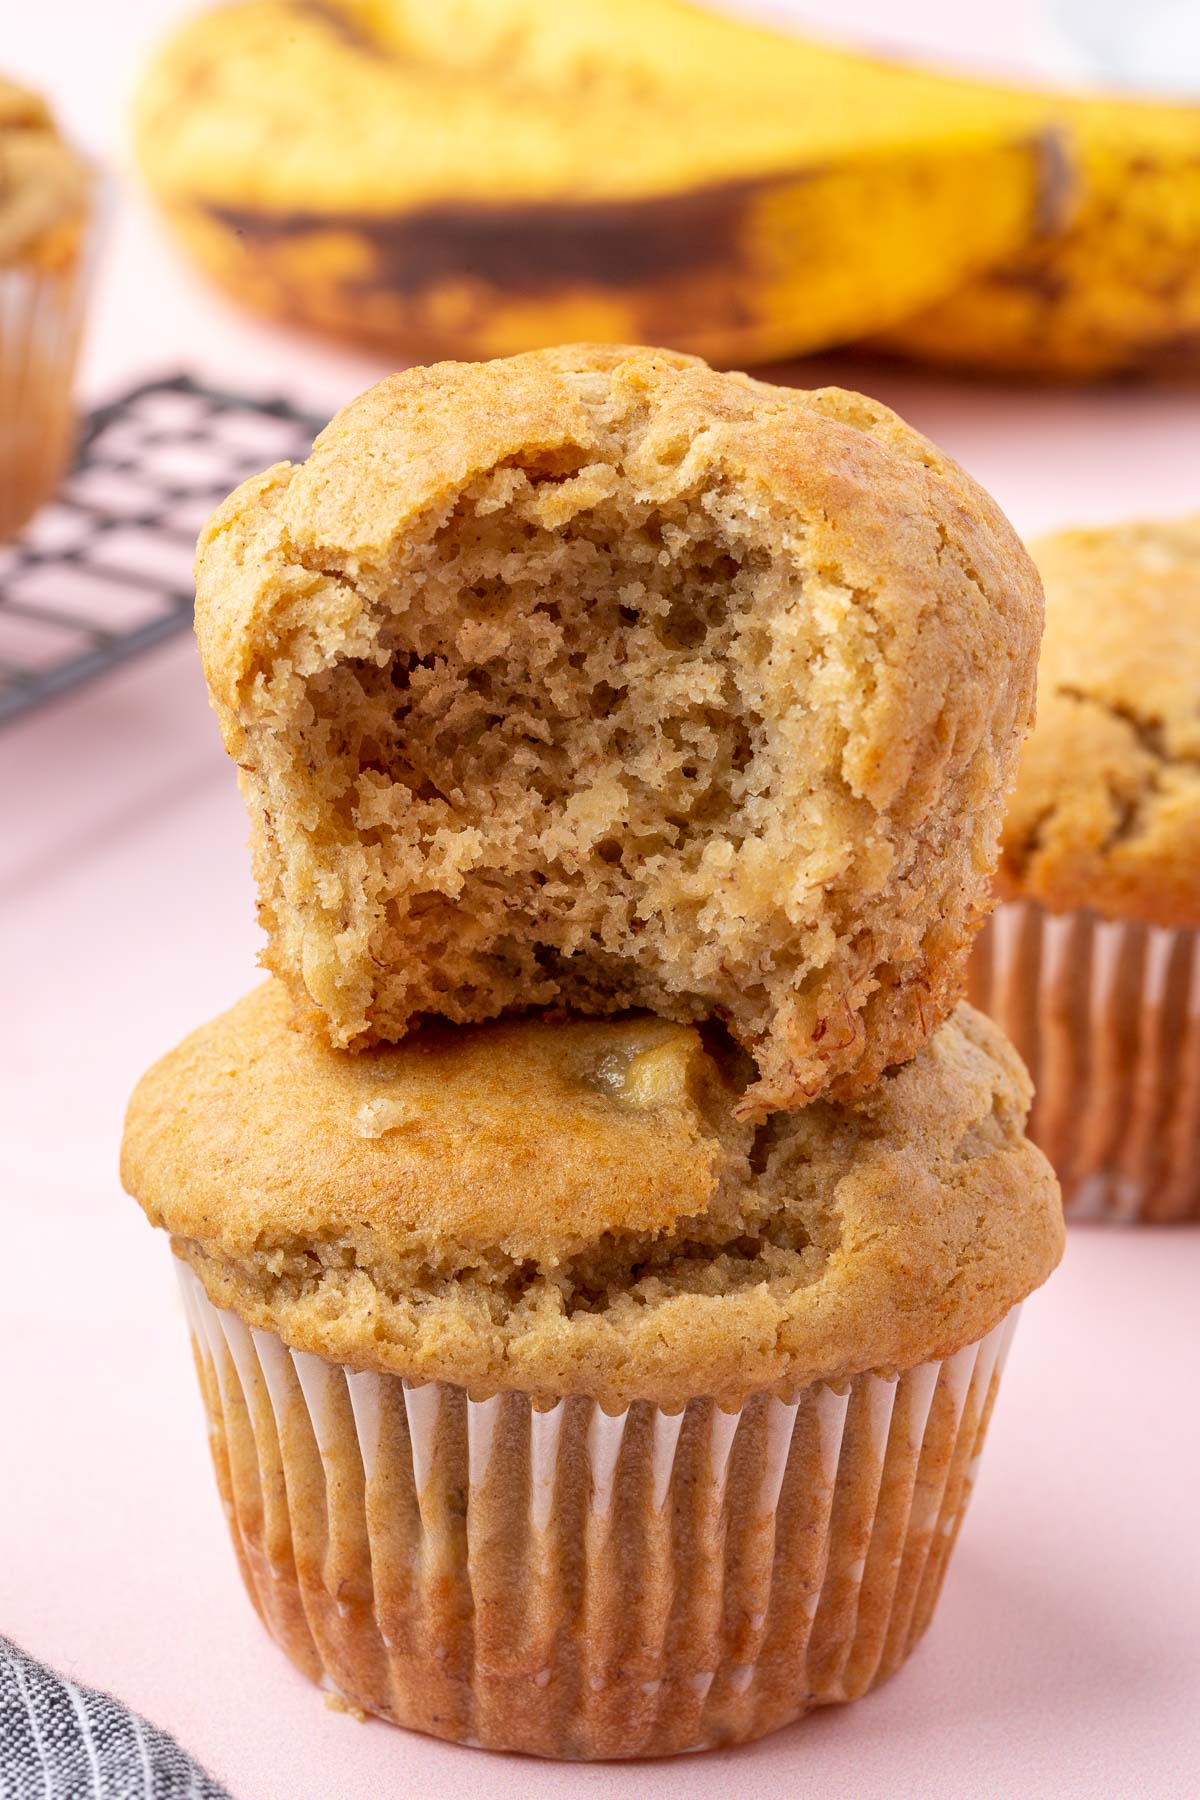 Two gluten-free banana muffins stacked on top of each other with the top one having a bite taken out of it.